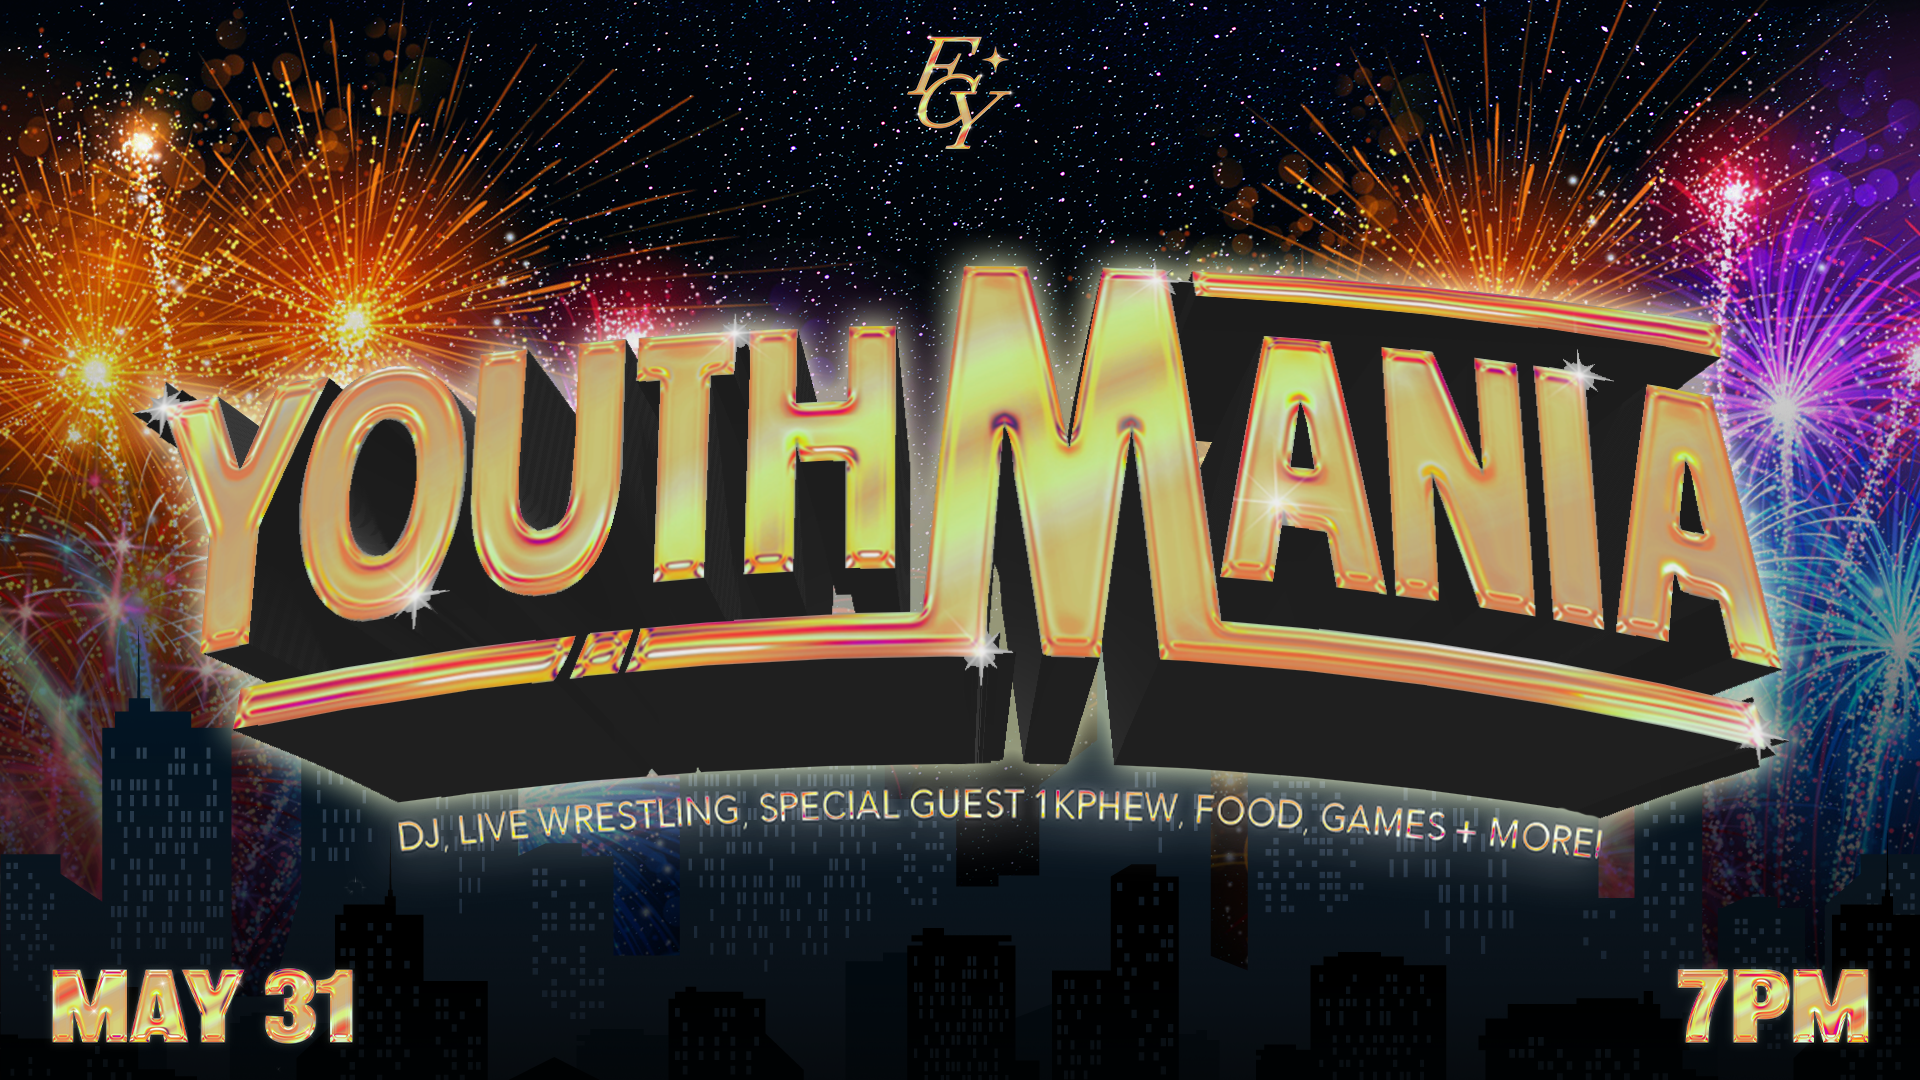 FCY United Night: YOUTHMANIA at the Midtown campus